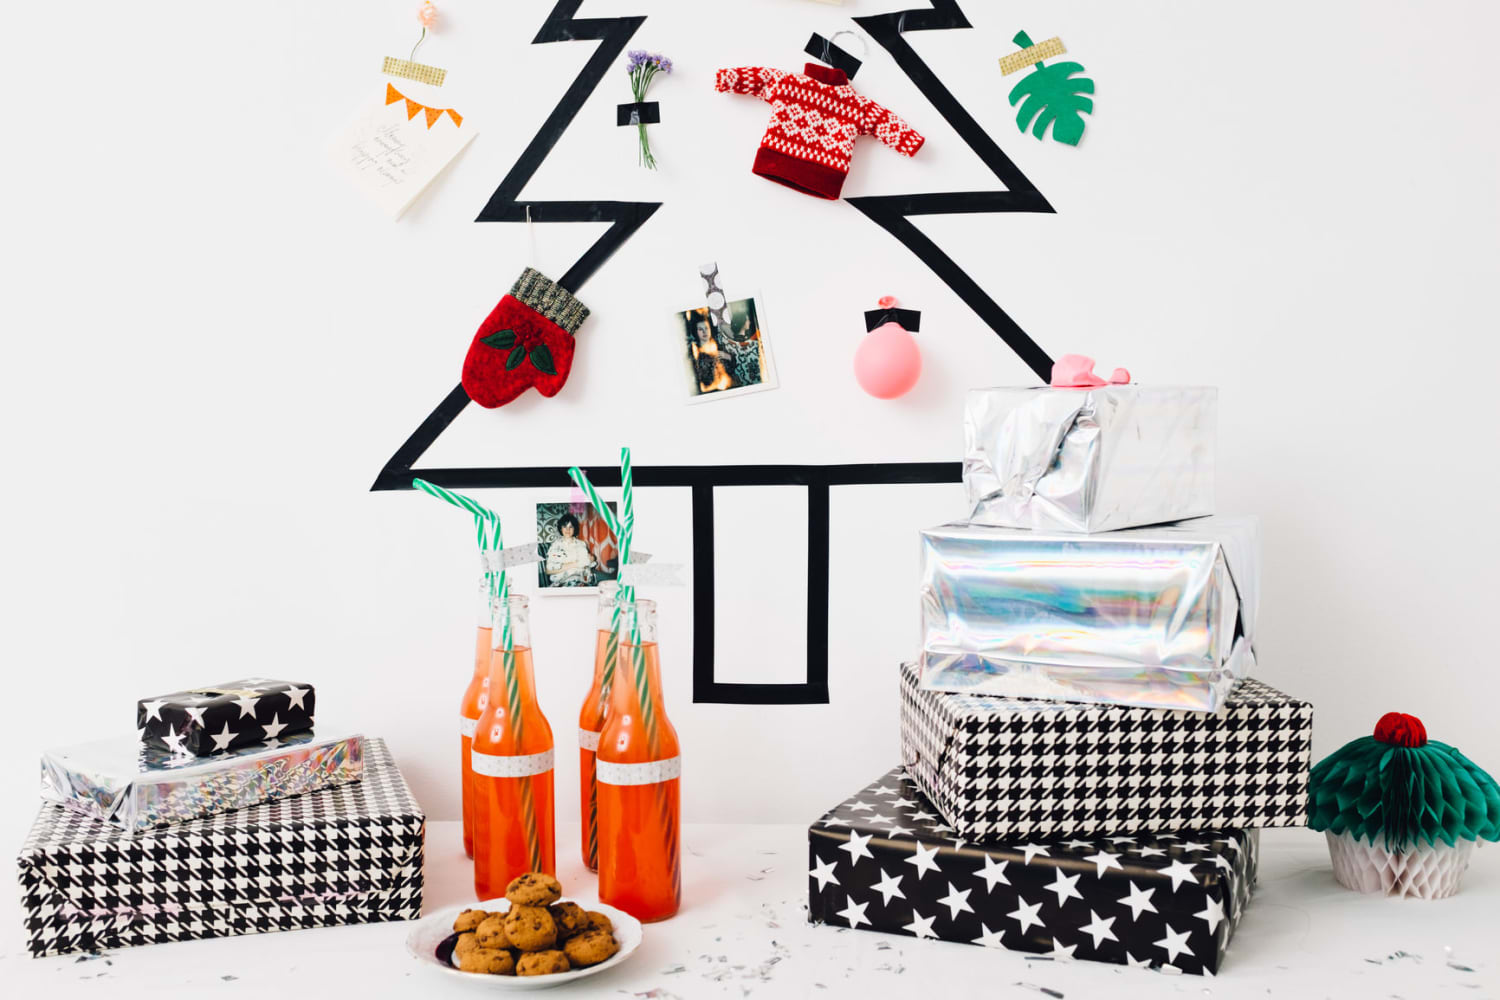 16 Wall Christmas Trees That Save Space But Maximize Holiday Cheer